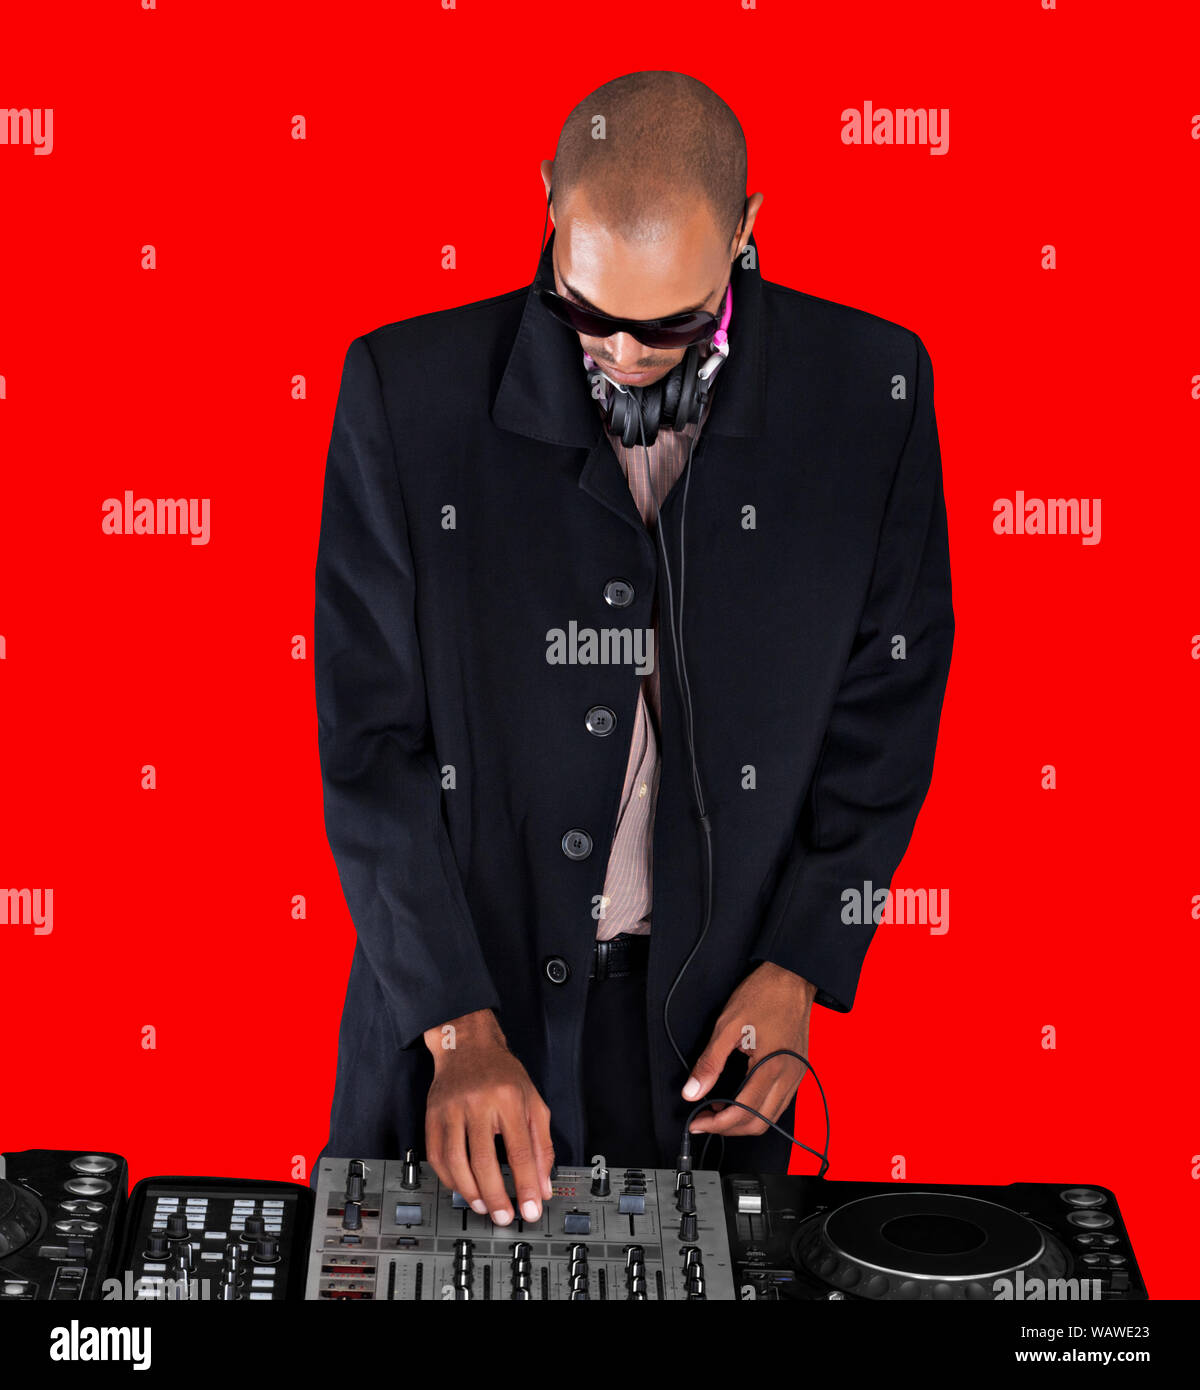 African musician singer turning knobs at the turntable of a  DJ music system Stock Photo